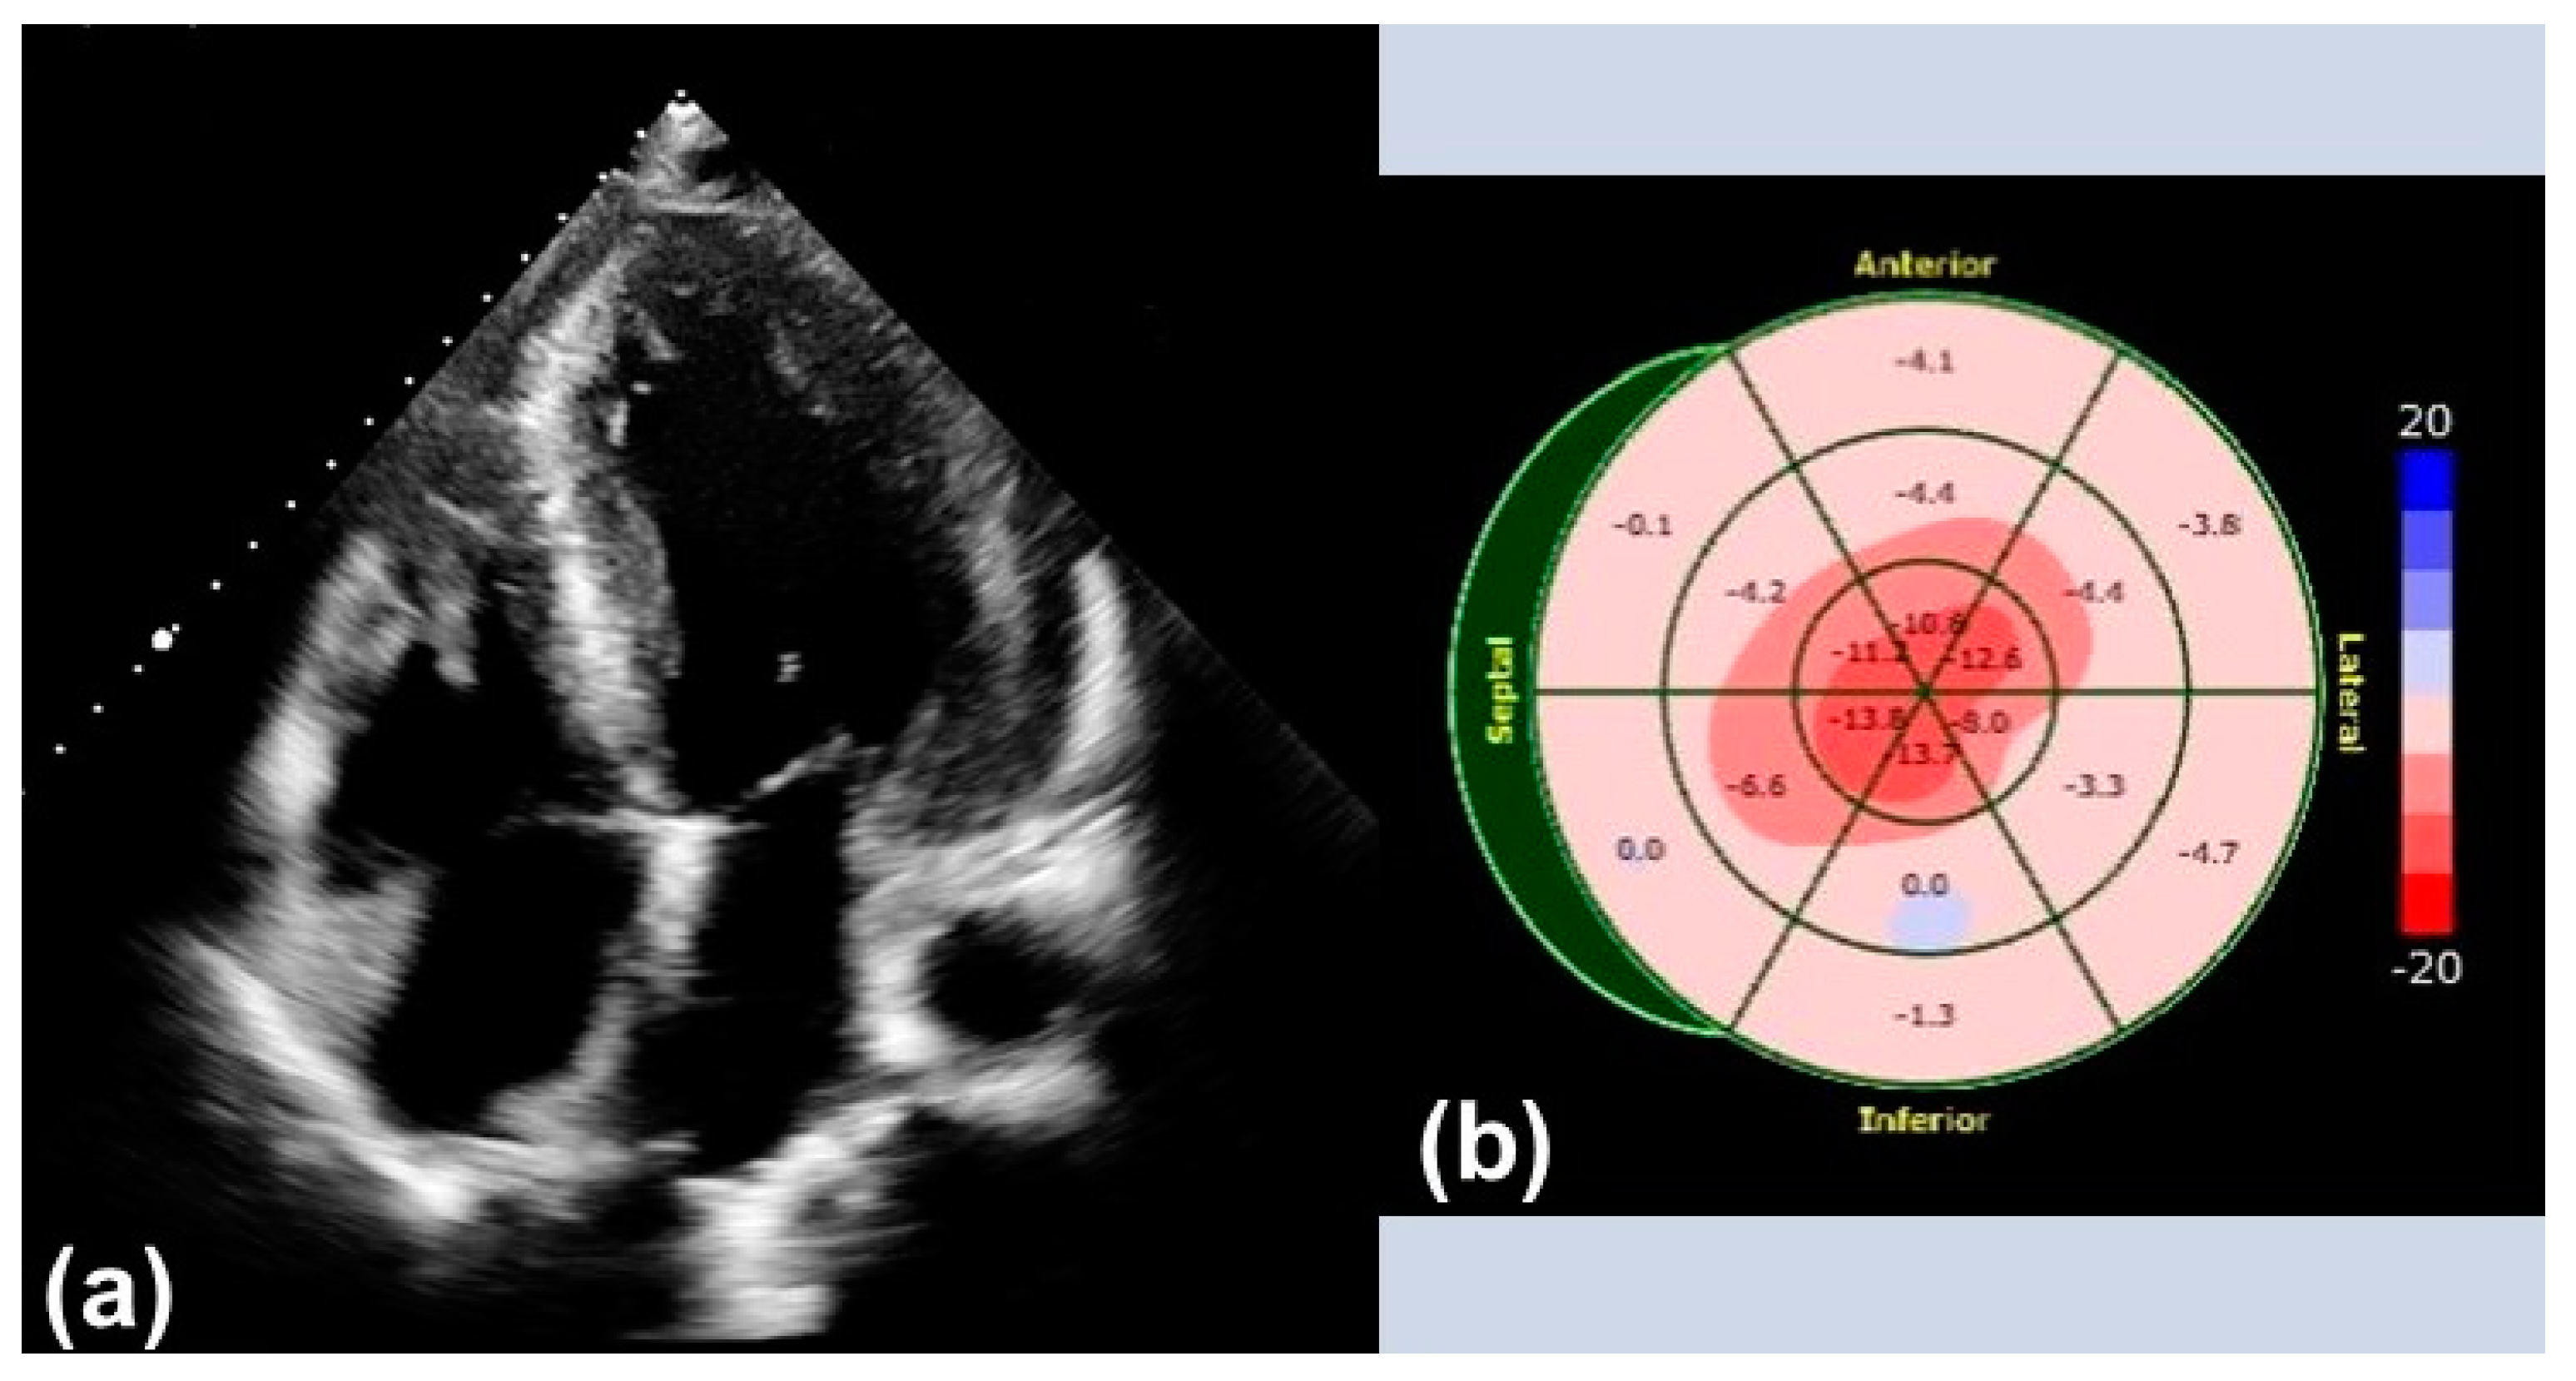 Cardiac imaging - Abnormal global longitudinal strain with apical sparing  (cherry on top) pattern in cardiac amyloidosis (sensitivity 93% and  specificity 82%). #echofirst #cardiacamyloidosis